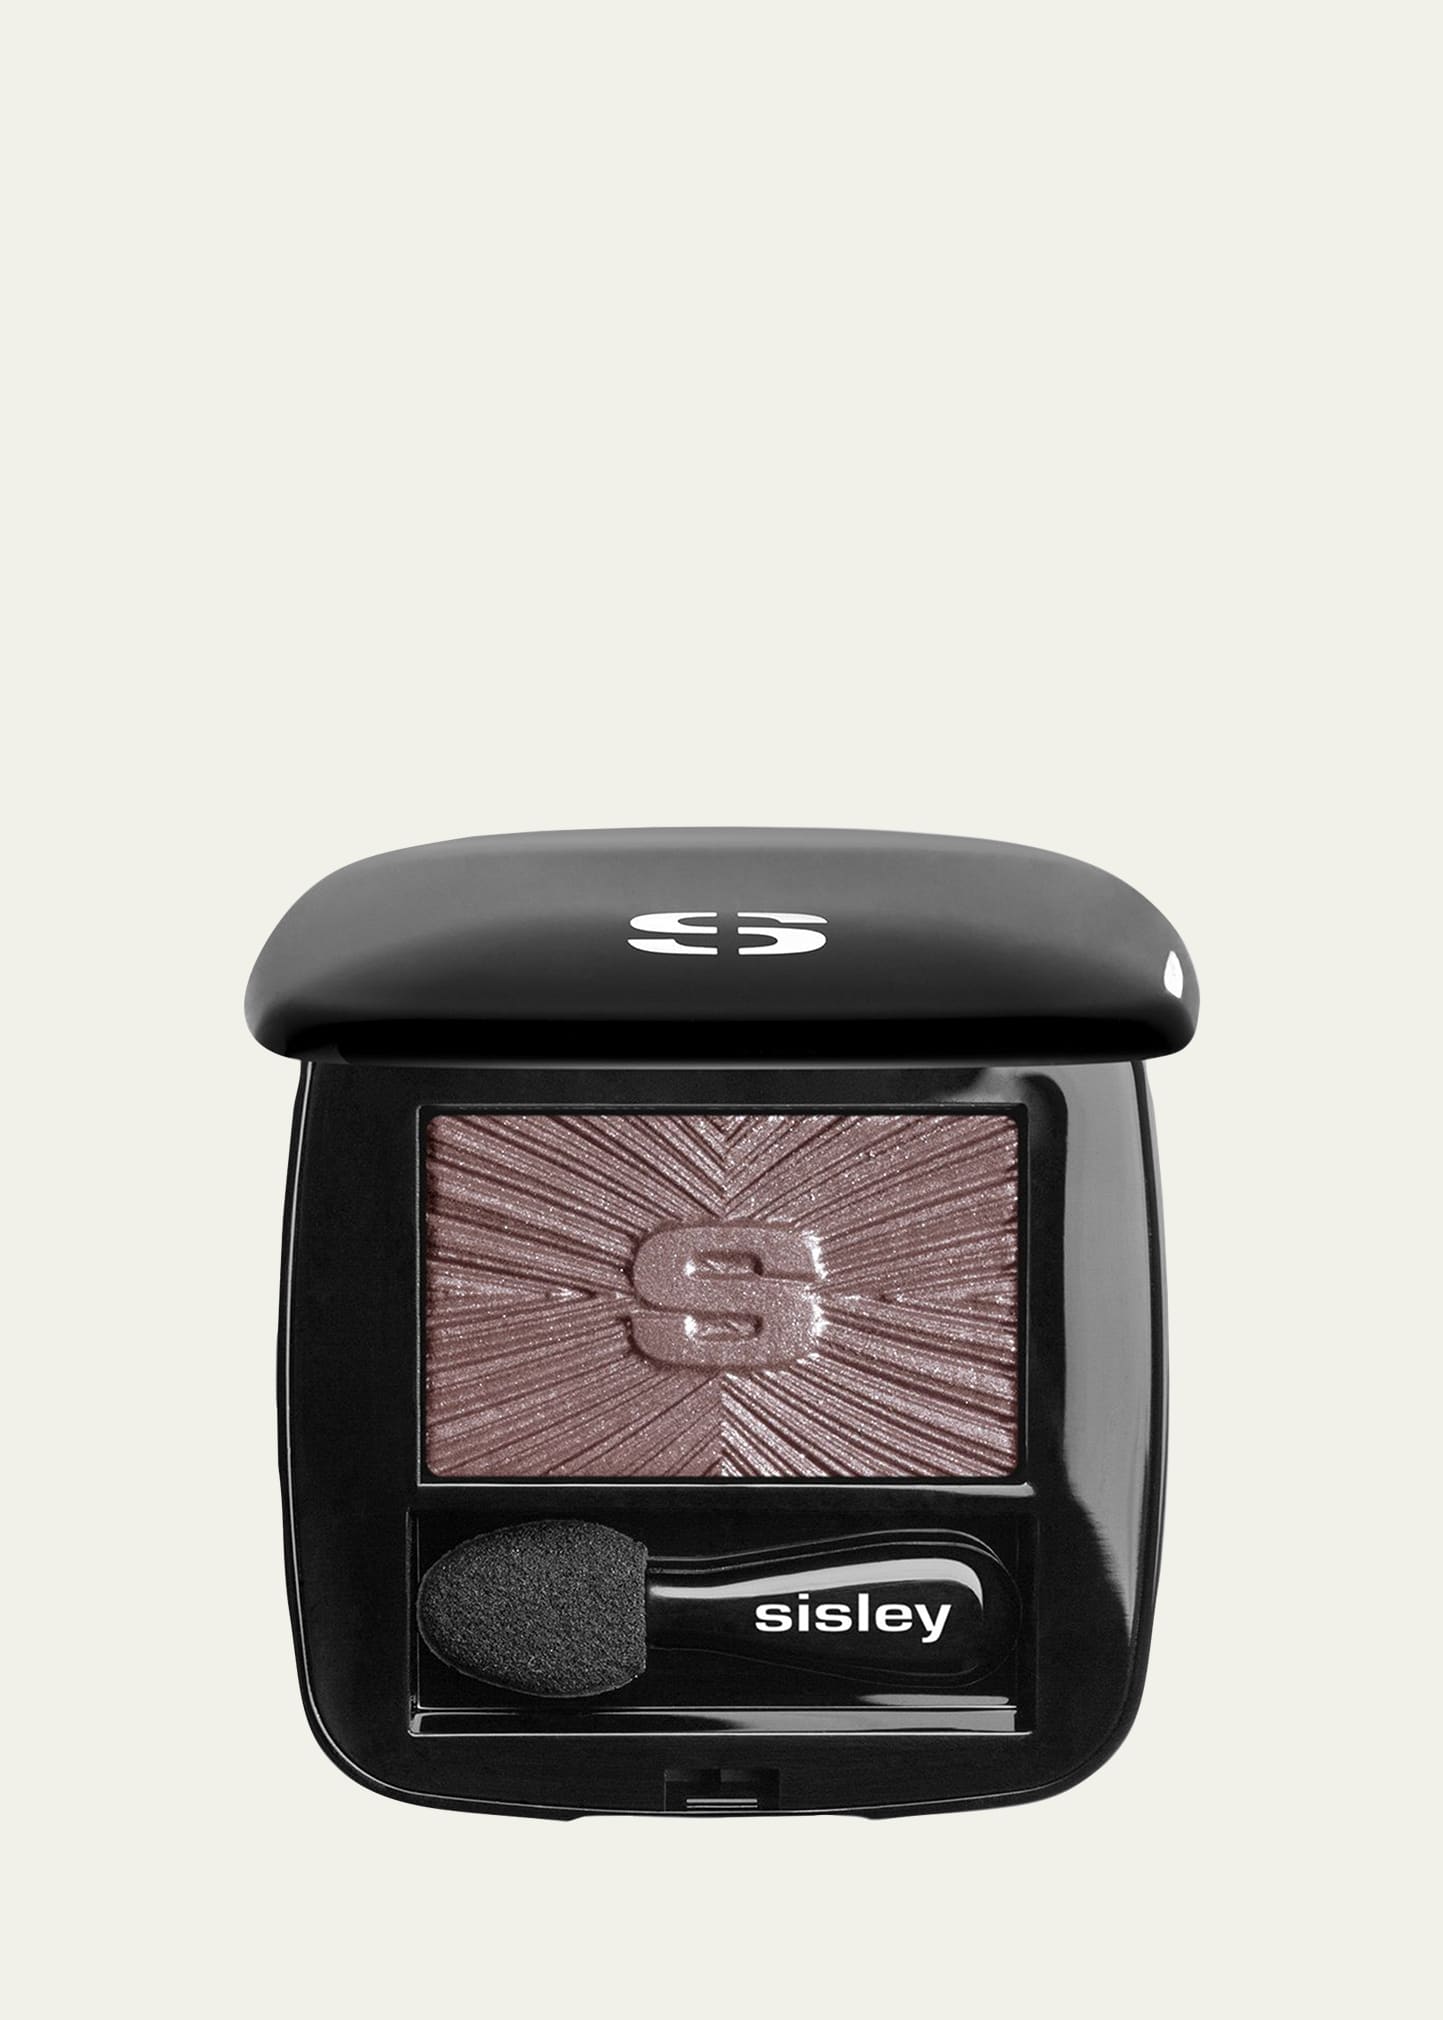 Sisley Paris Les Phyto Ombres Eyeshadow In 15 Matte Taupe